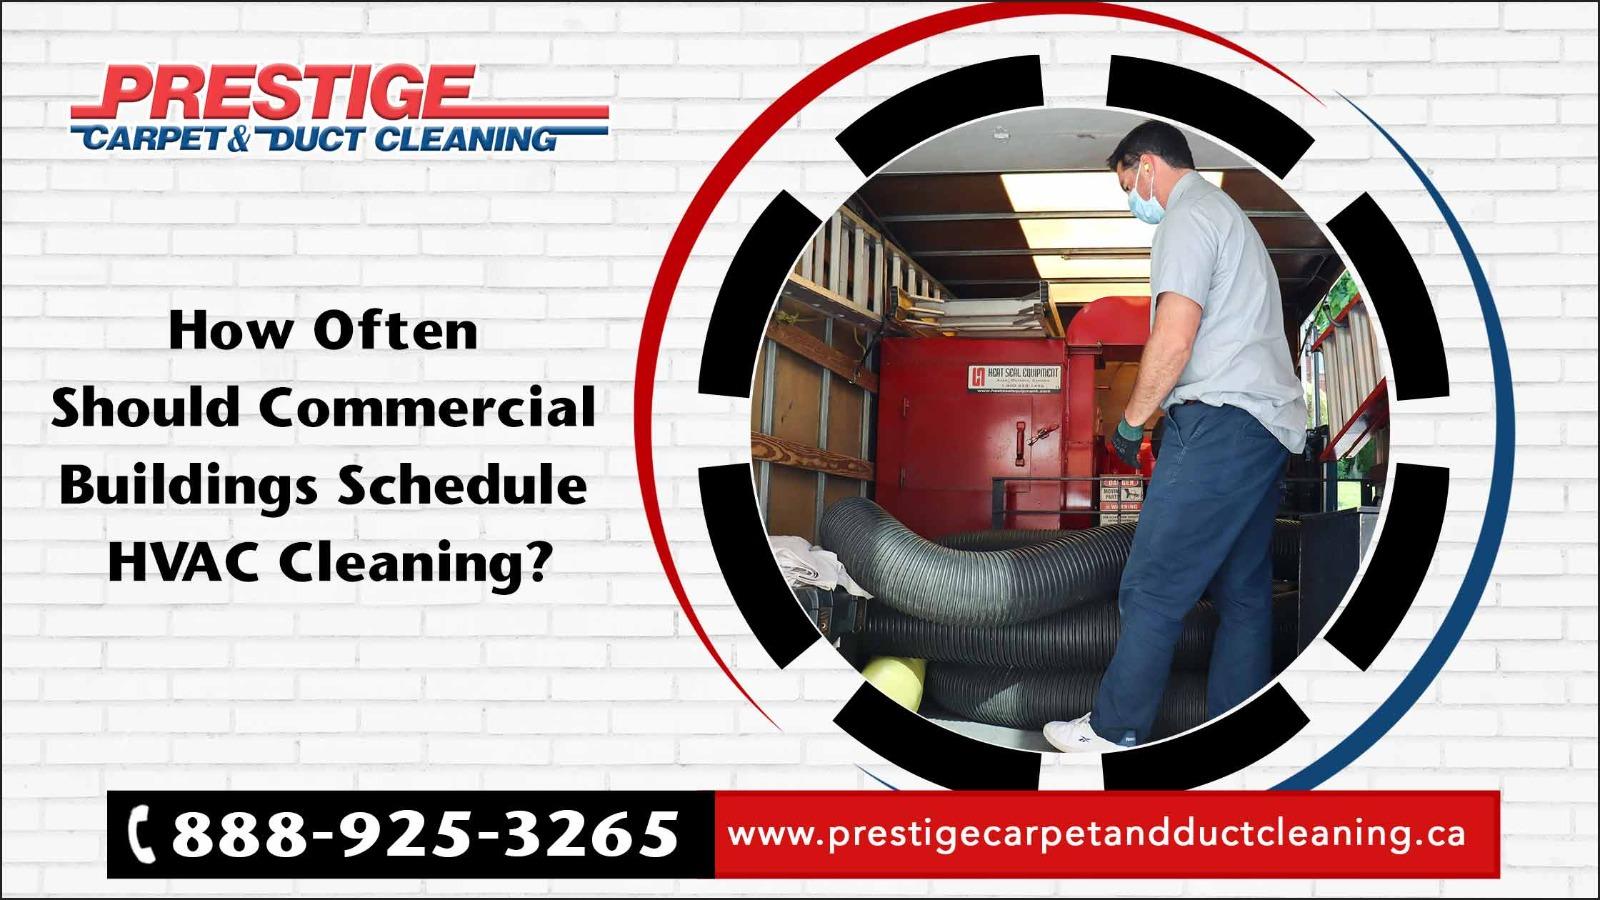 How Often Should Commercial Buildings Schedule HVAC Cleaning